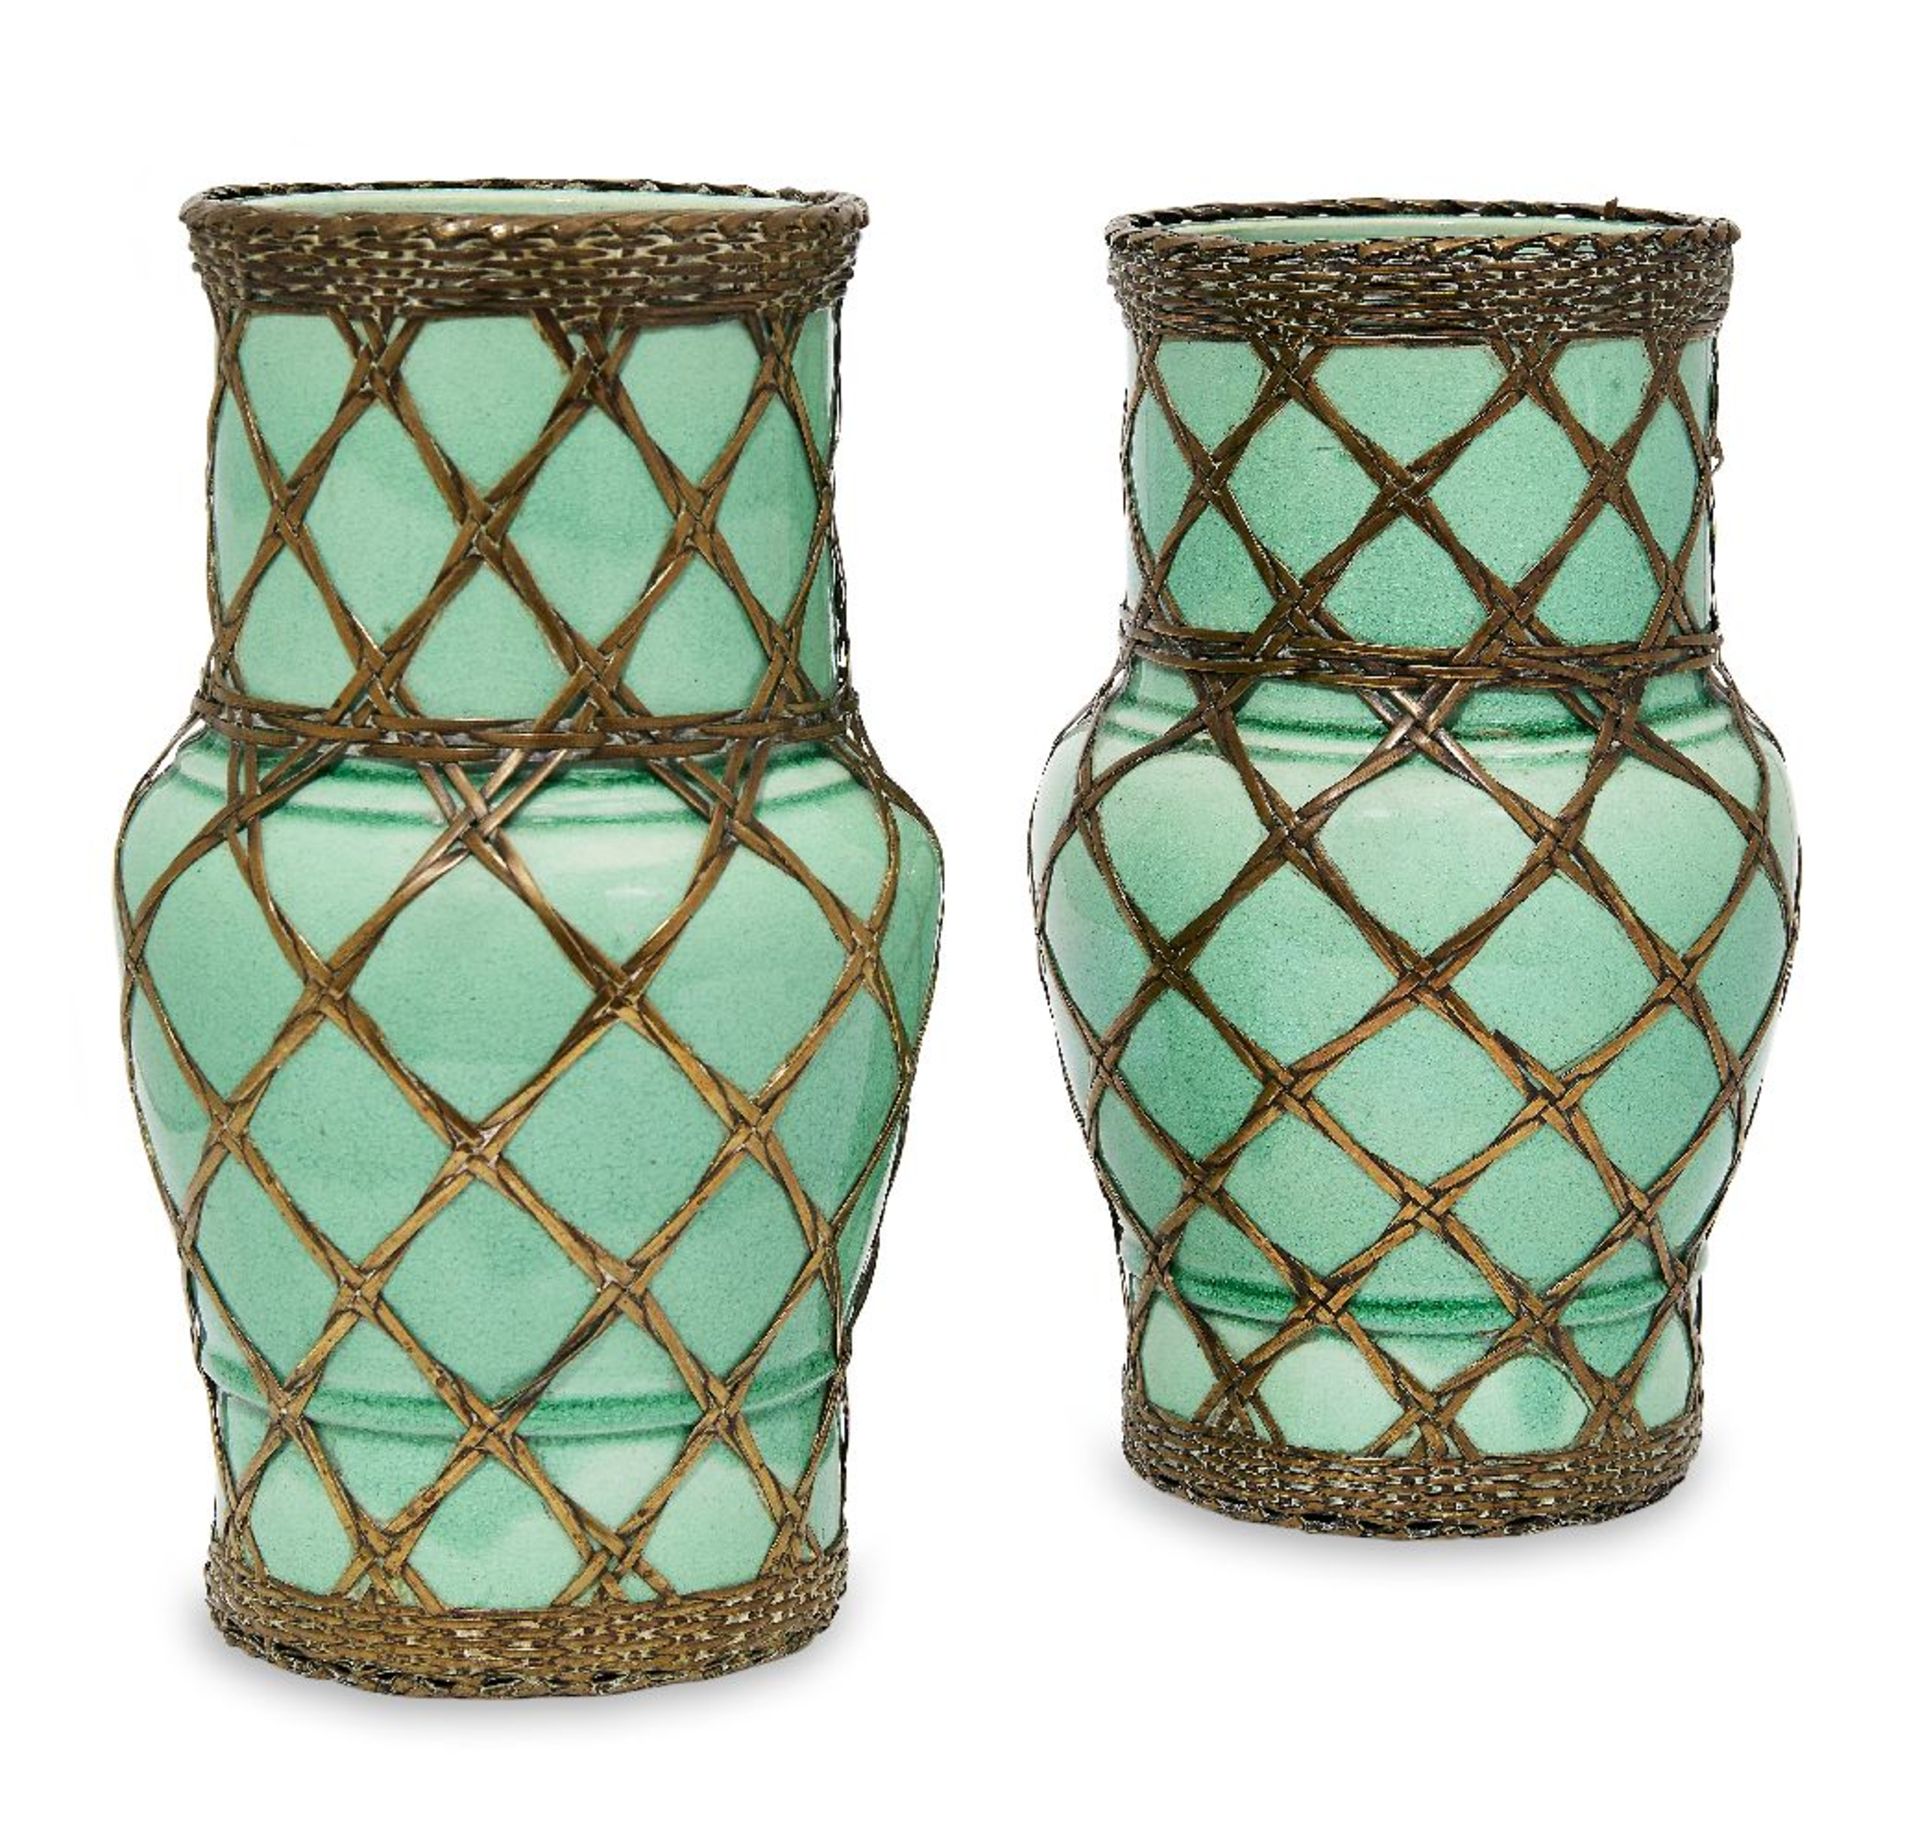 A pair of Japanese green glazed pottery vases, first half 20th century, with gilt-metal basket-weave